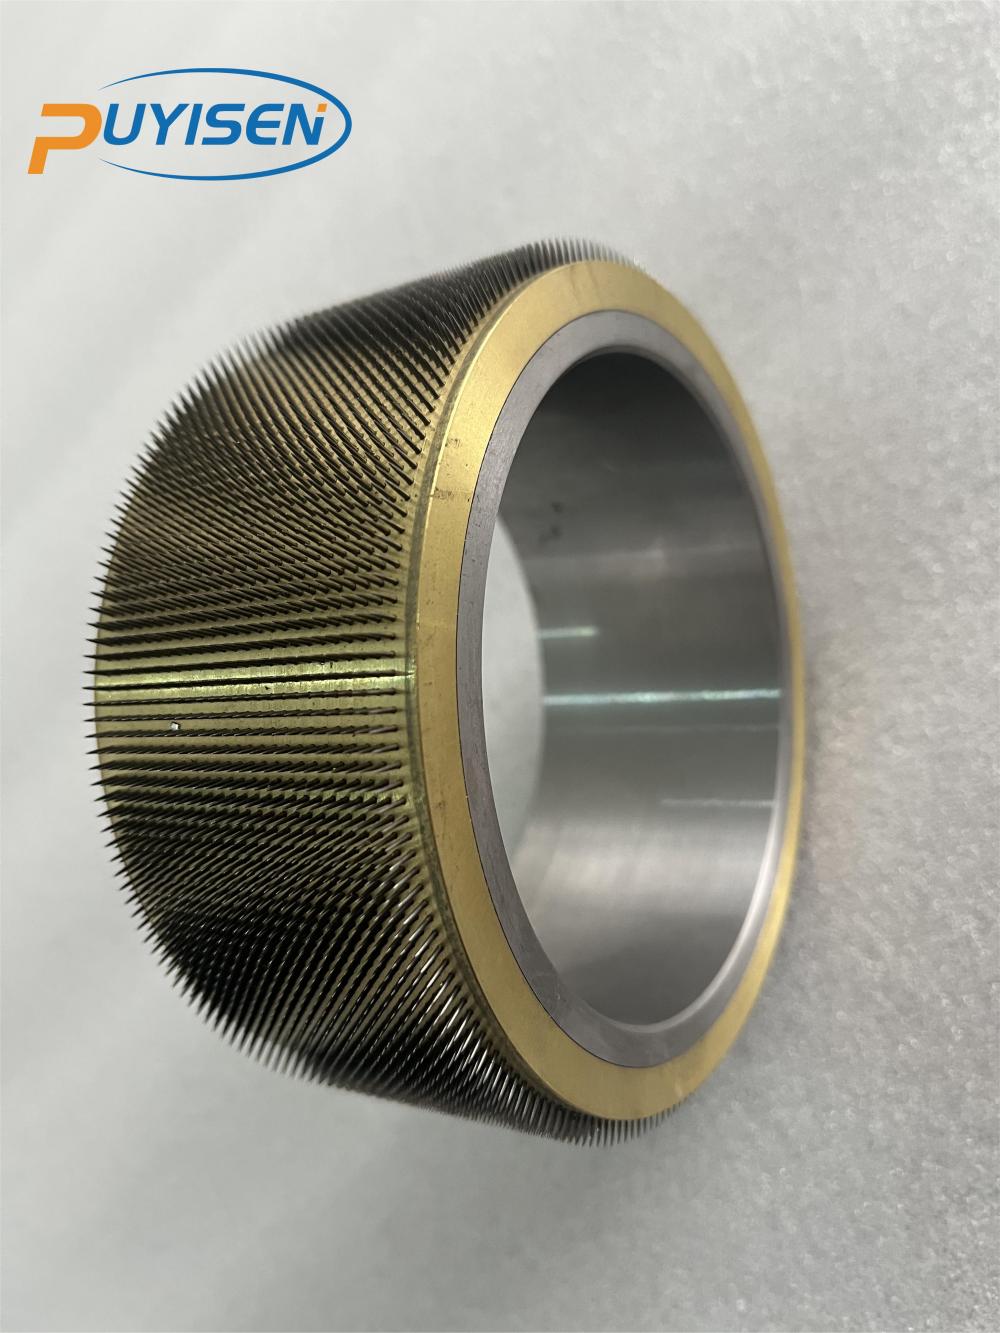 Needle roller bearing built to last